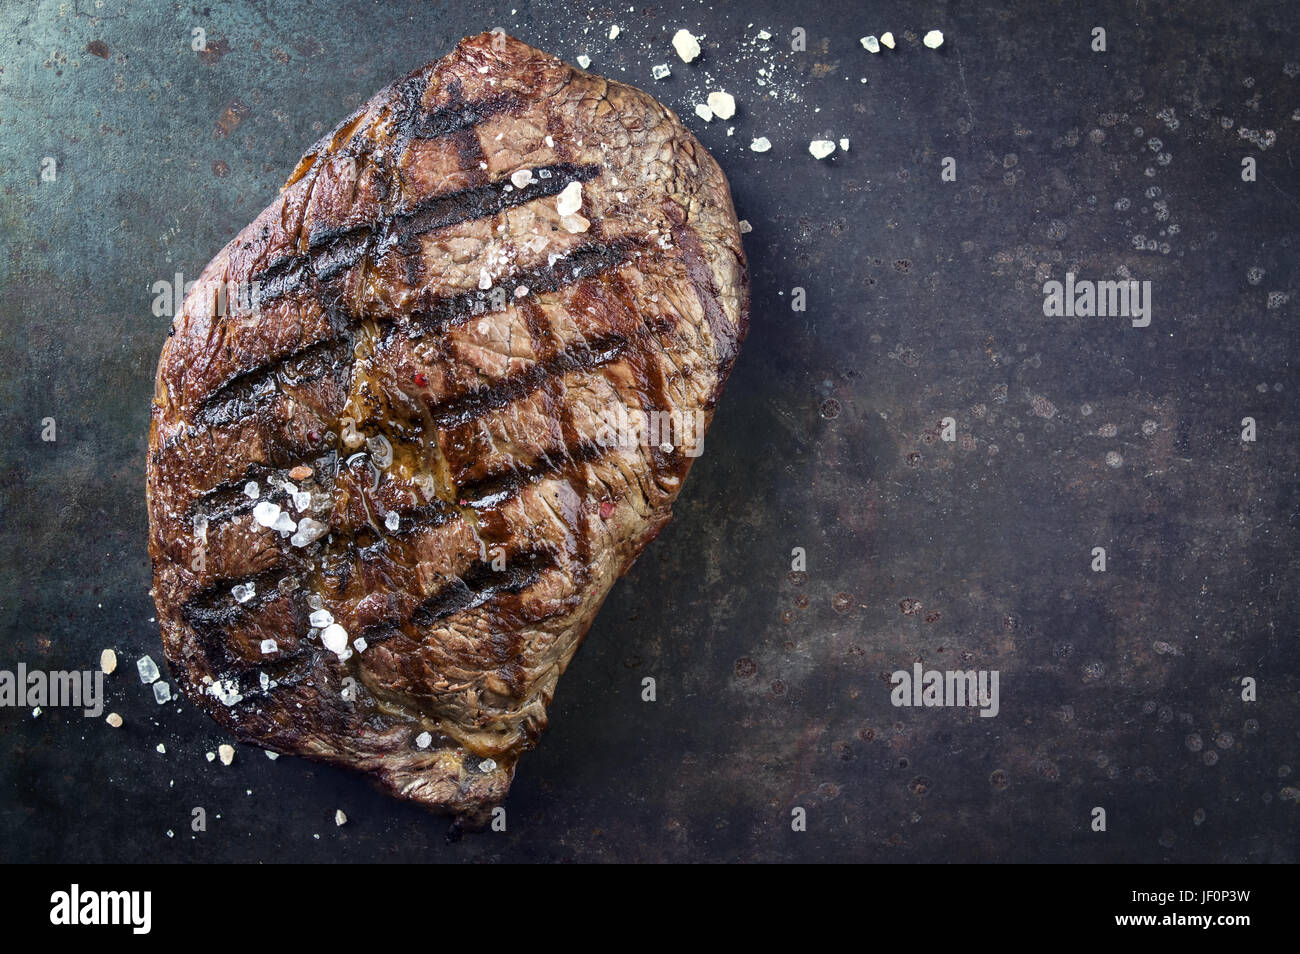 Dry Aged Barbecue Entrecote Double Stock Photo - Alamy